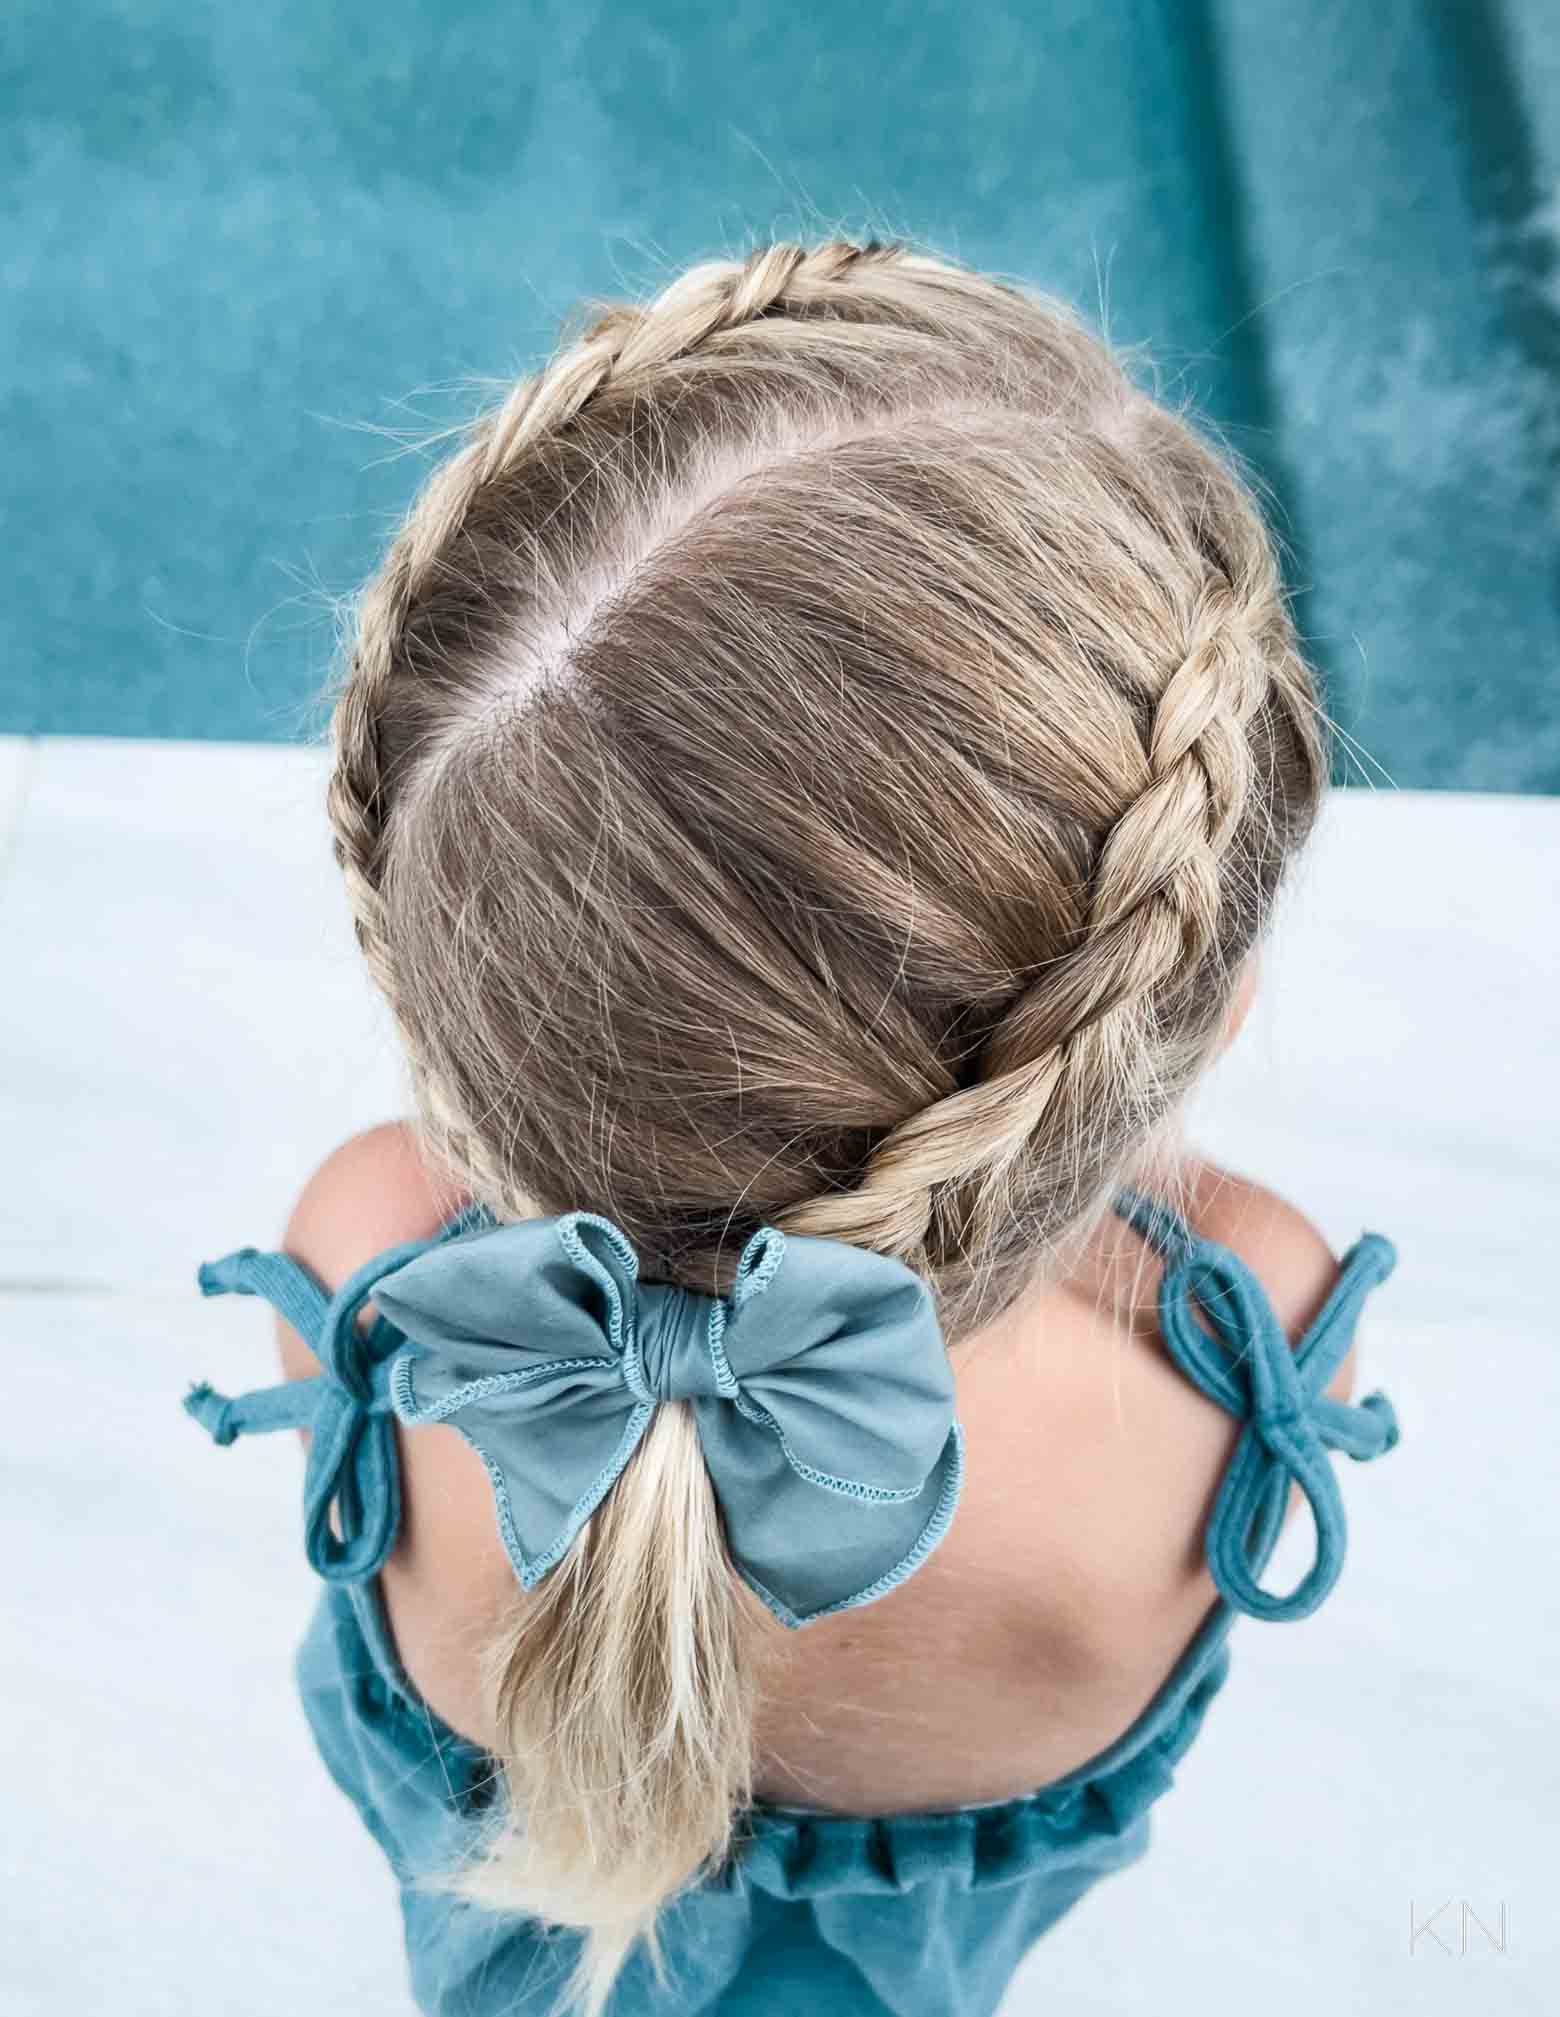 30 Fancy Party Outfits And Hairstyles Ideas To Rock Your Holiday